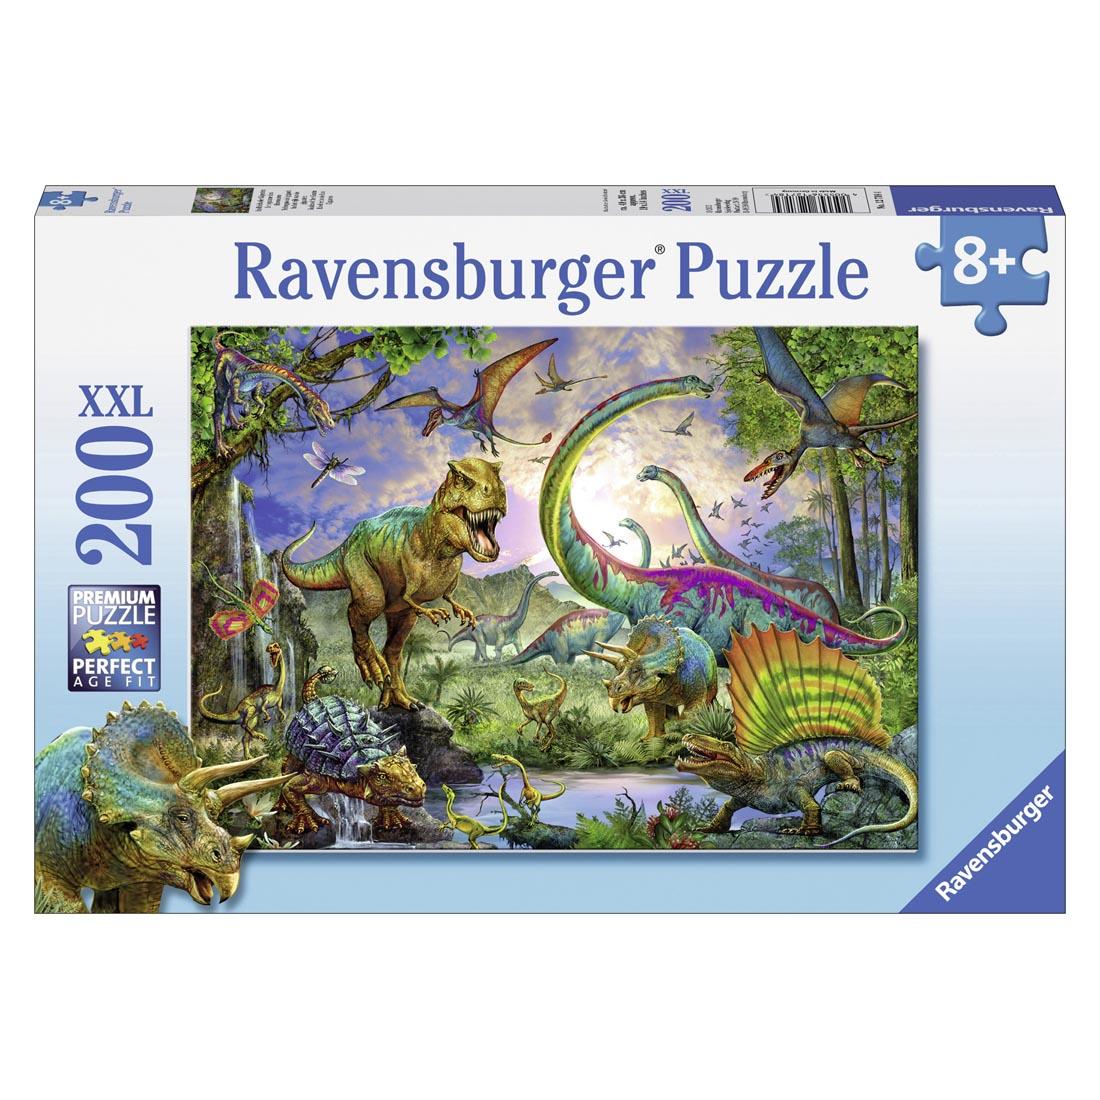 Realm of Giants 200-Piece Puzzle by Ravensburger